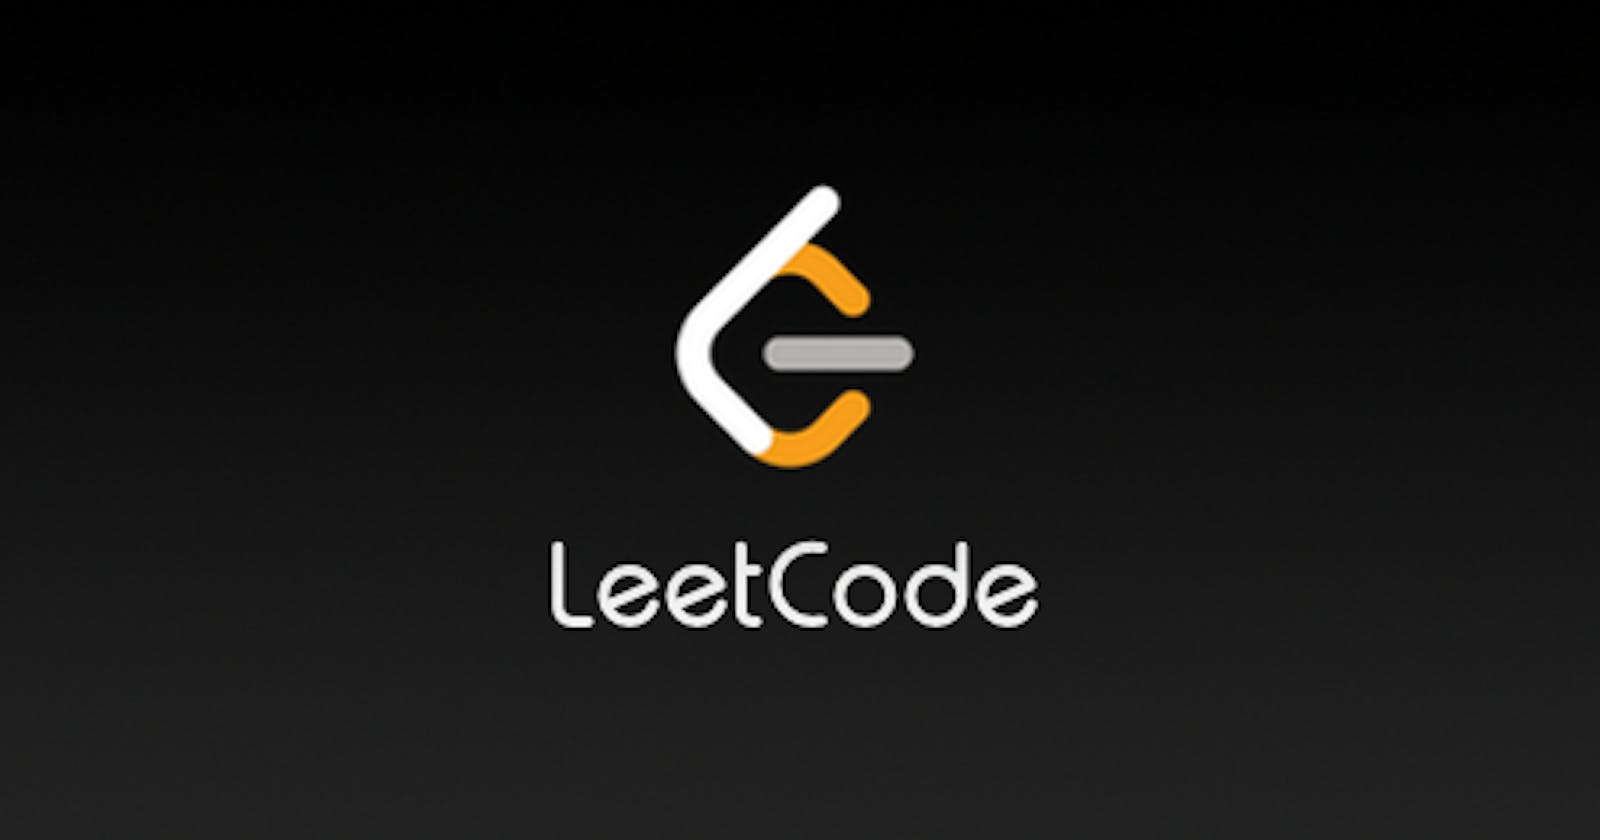 2 Convert Binary Number in a Linked List to Integer --> Leetcode November 2020 Challenge